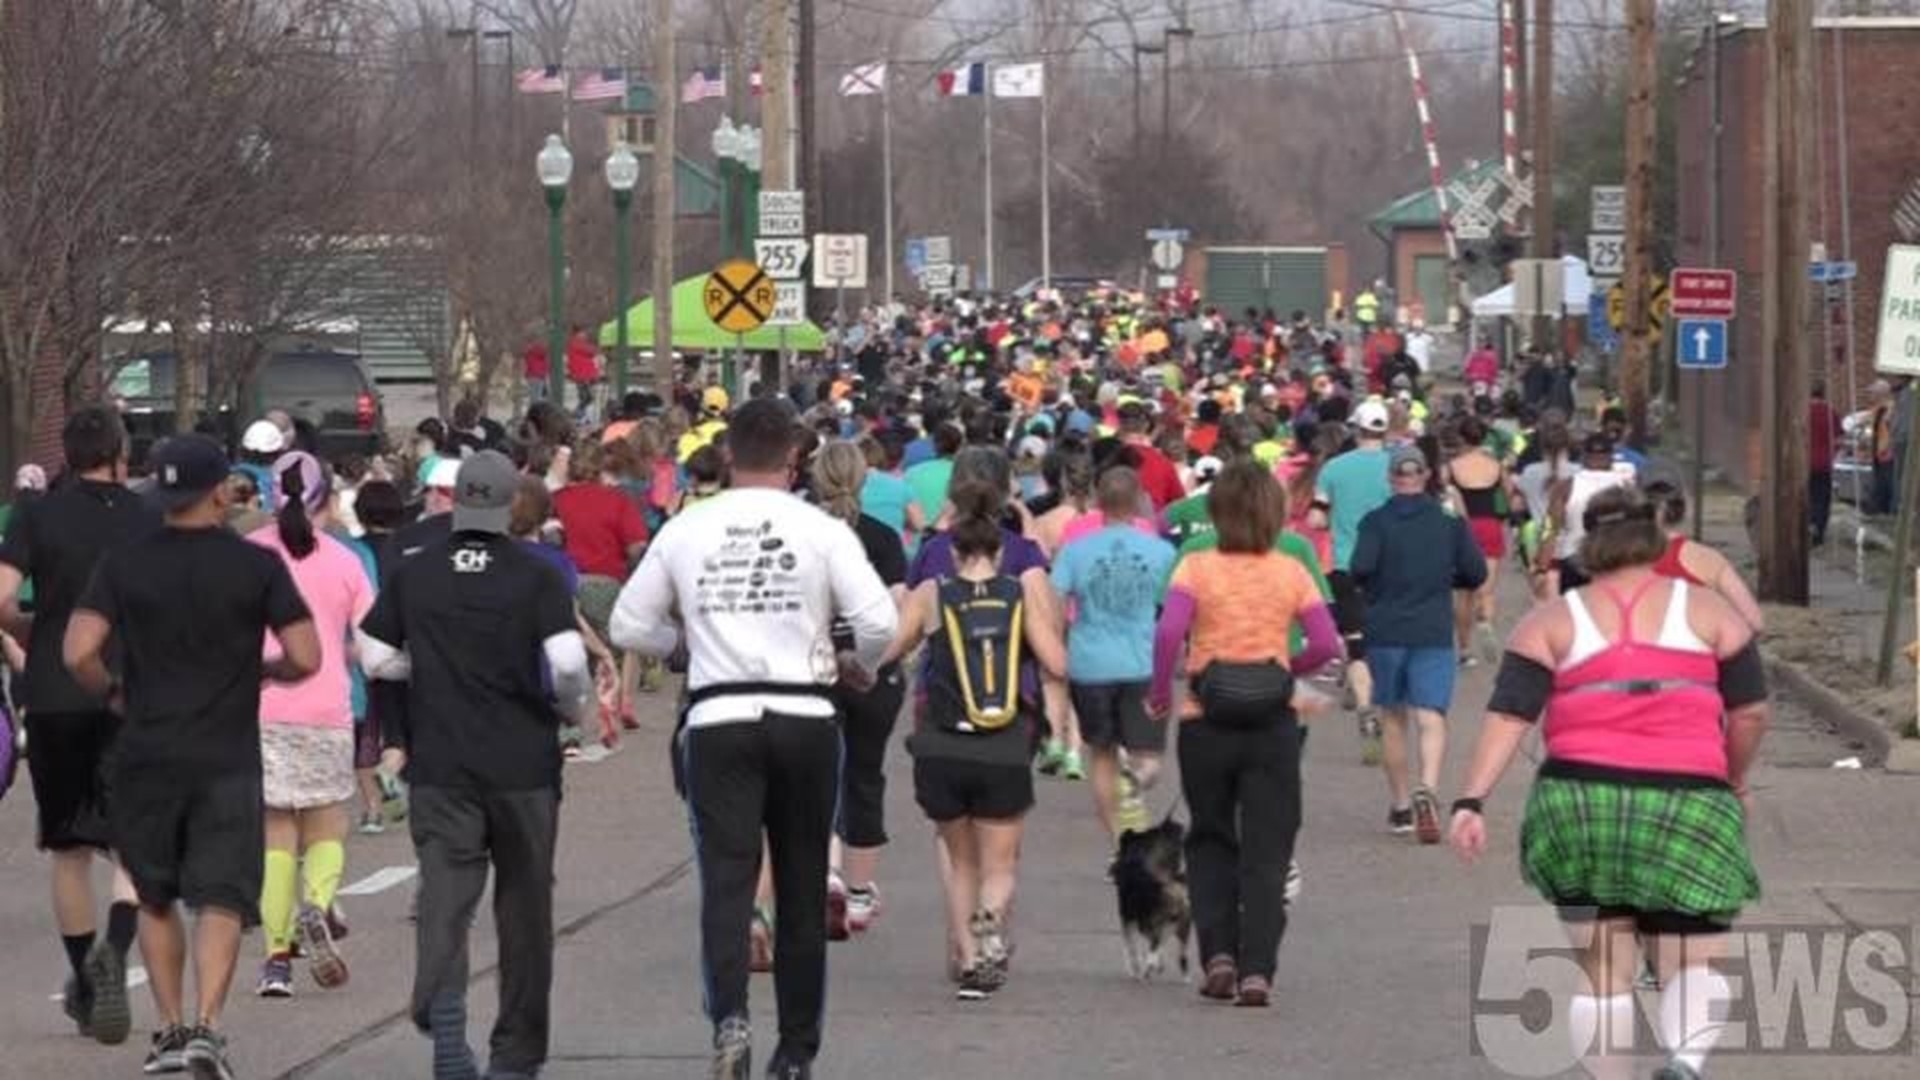 Hundreds Gearing Up For The Fort Smith Marathon, Expect Traffic Delays